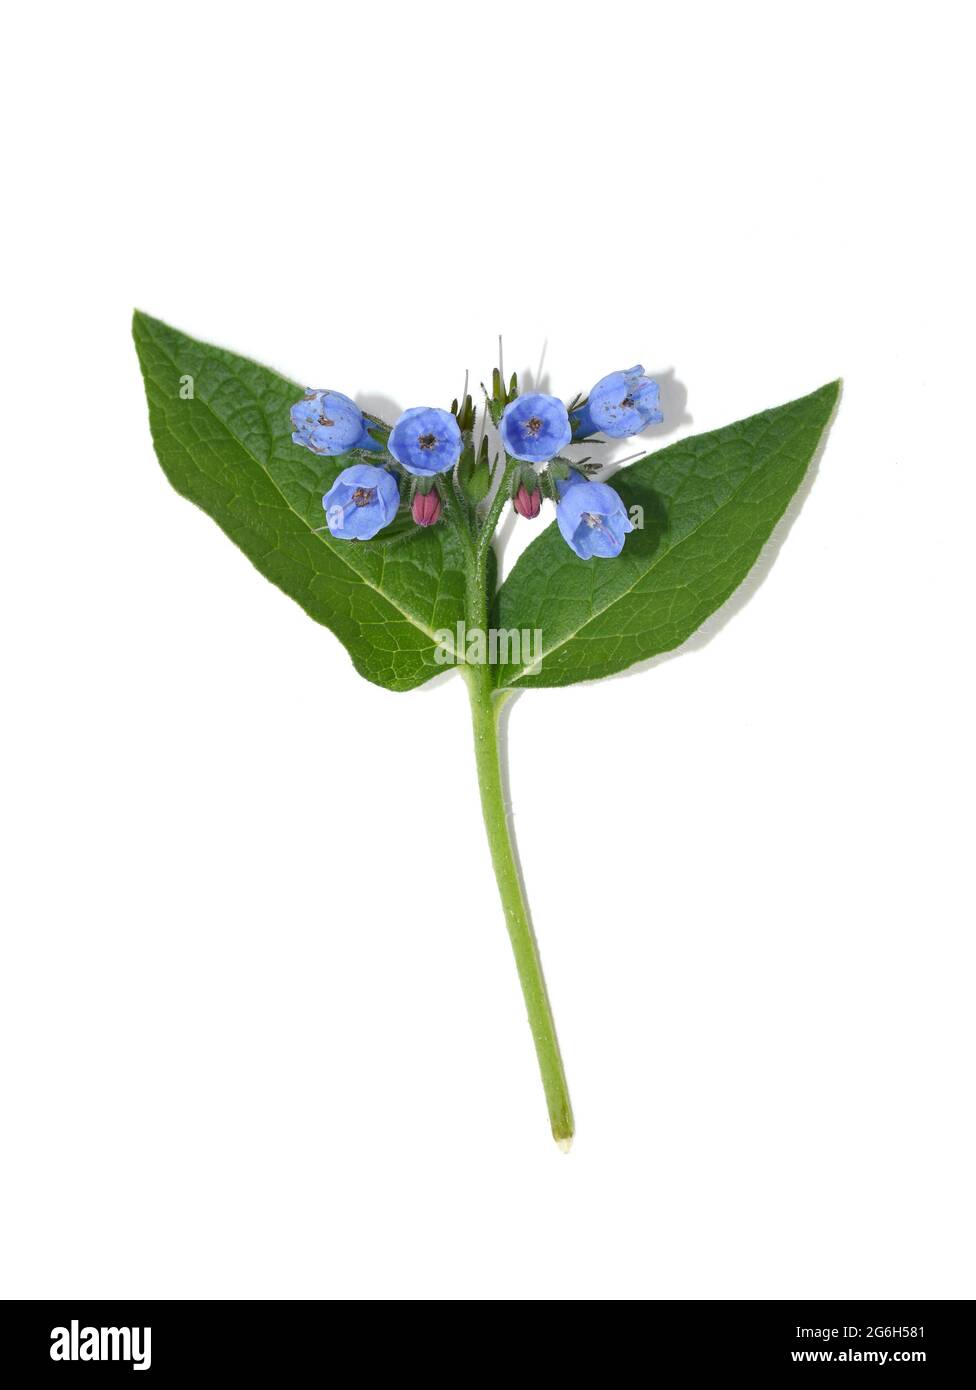 Common comfrey Symphytum officinale herb with blue flowers isolated on white background Stock Photo